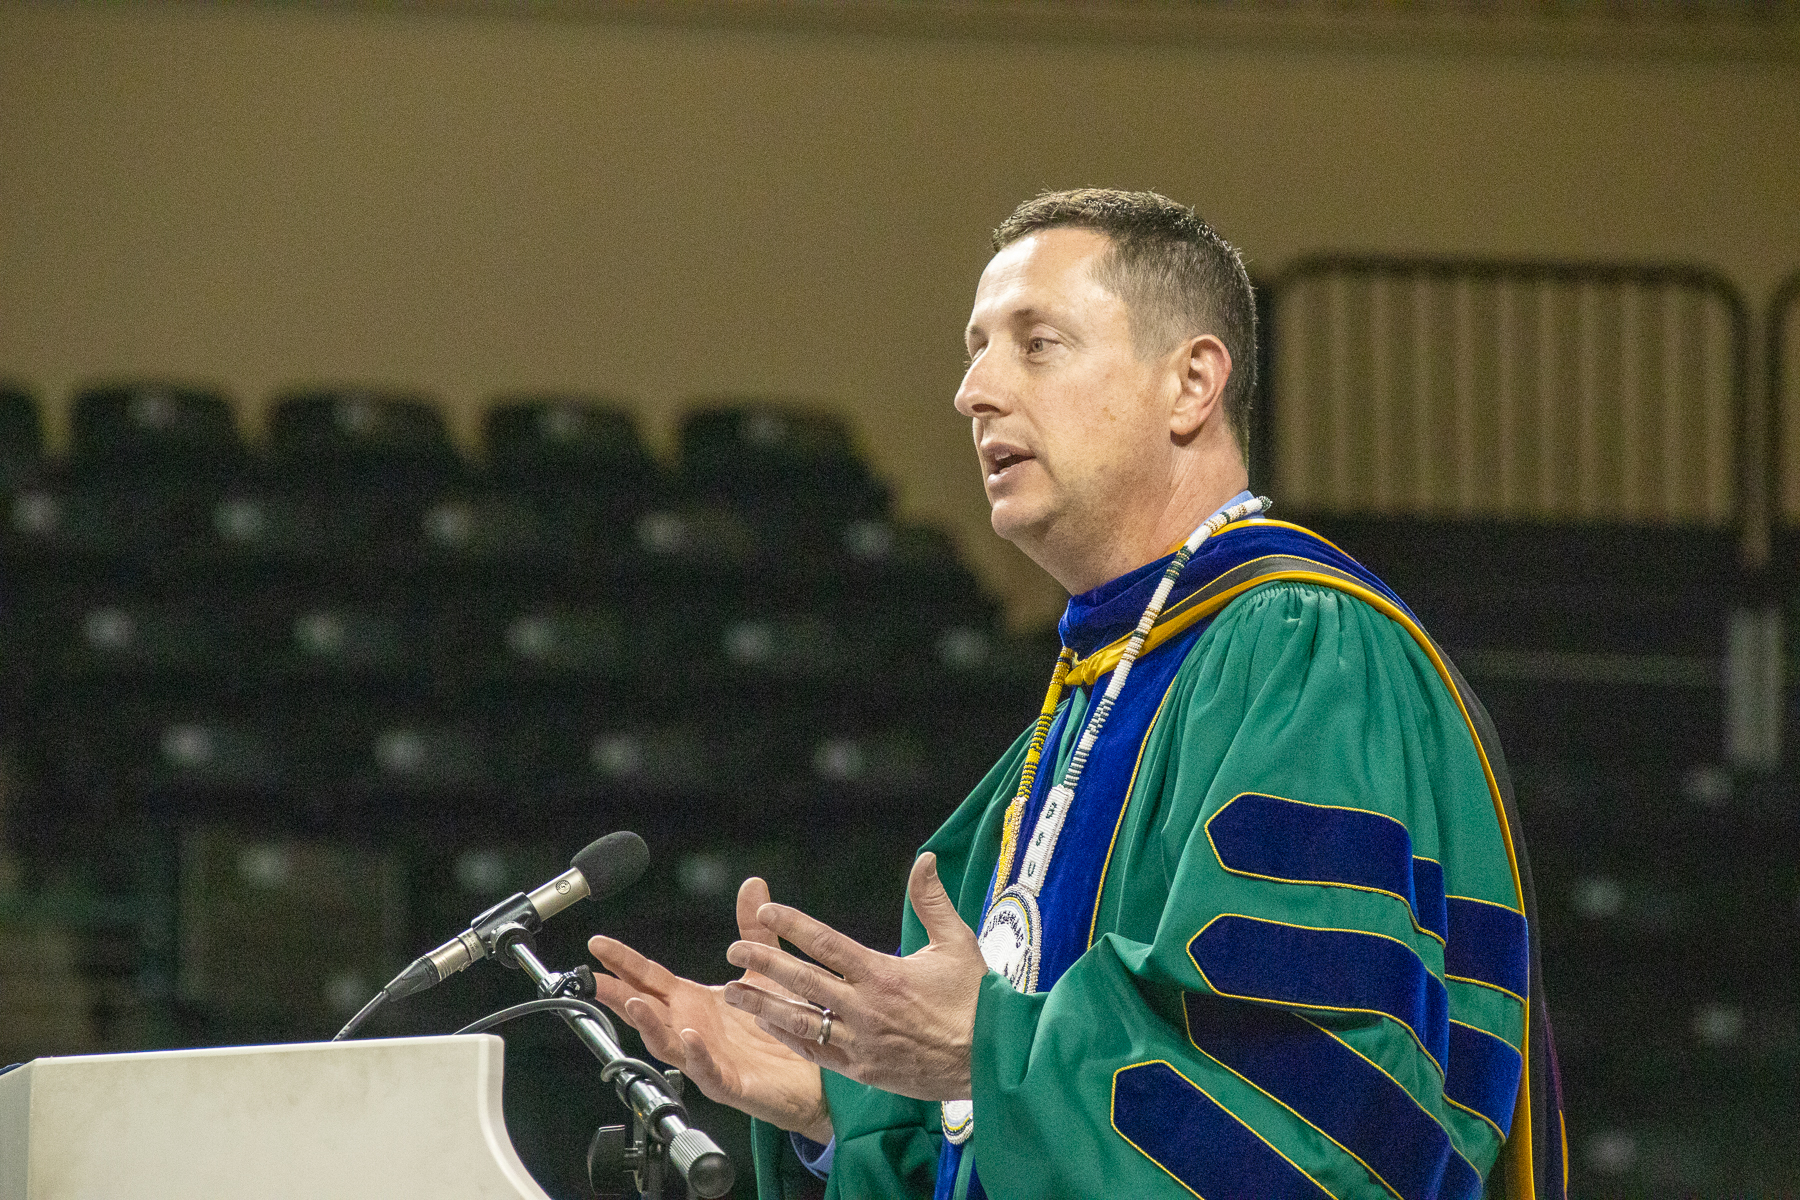 President John Hoffman speaks to attendees of NTC's commencement ceremony